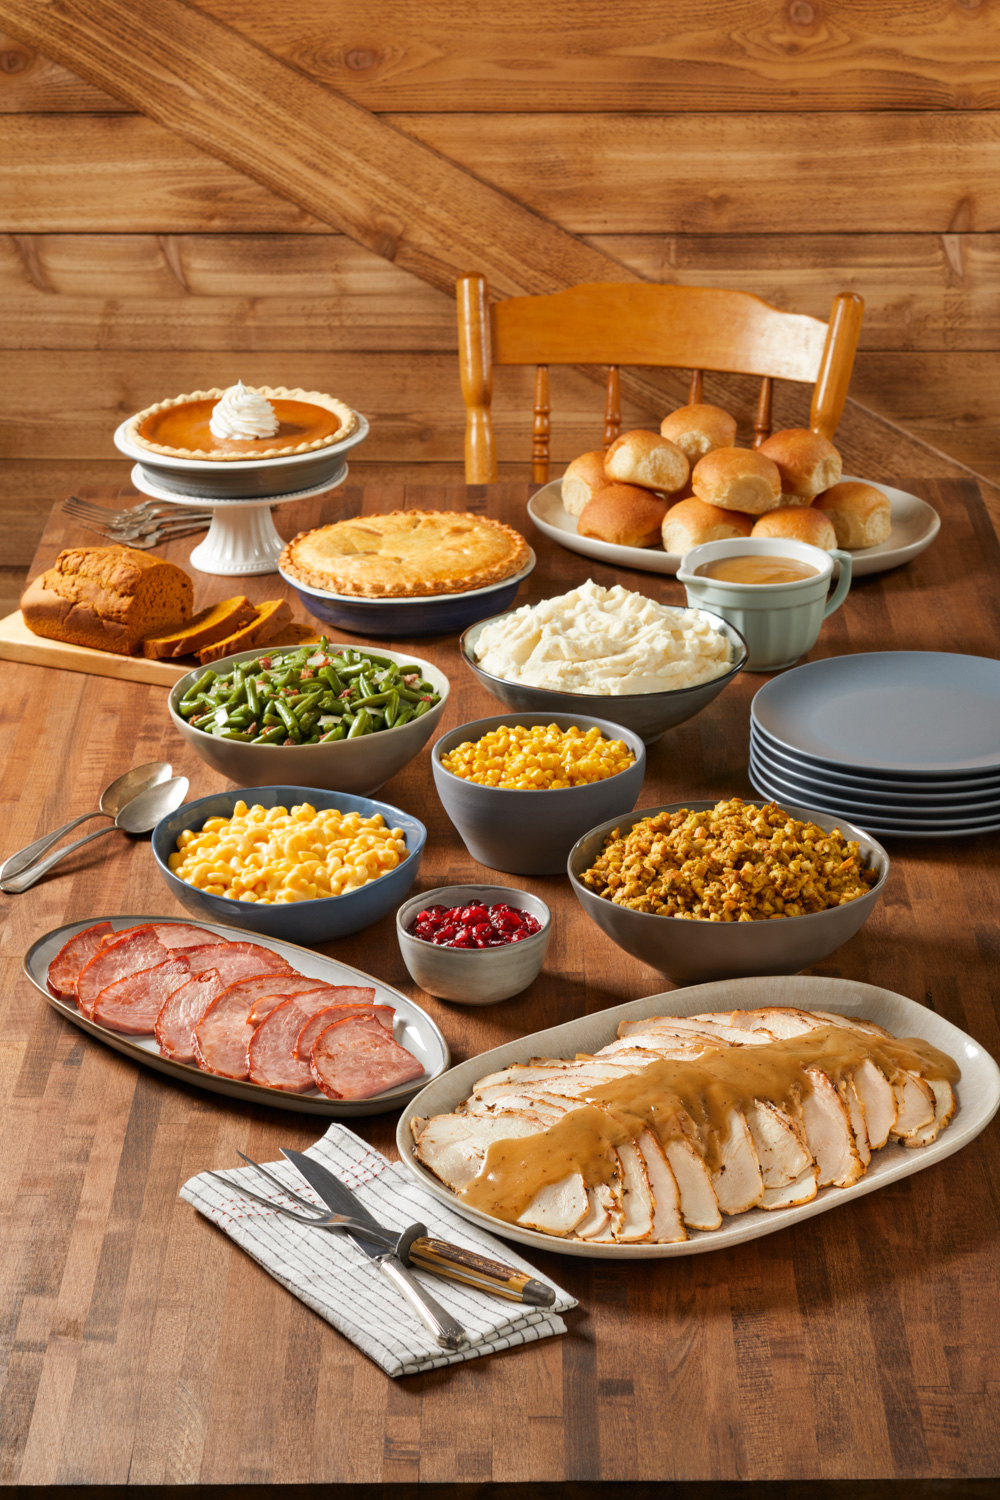 Give thanks with Bob Evans' "Homestyle Hugs" program this Thanksgiving